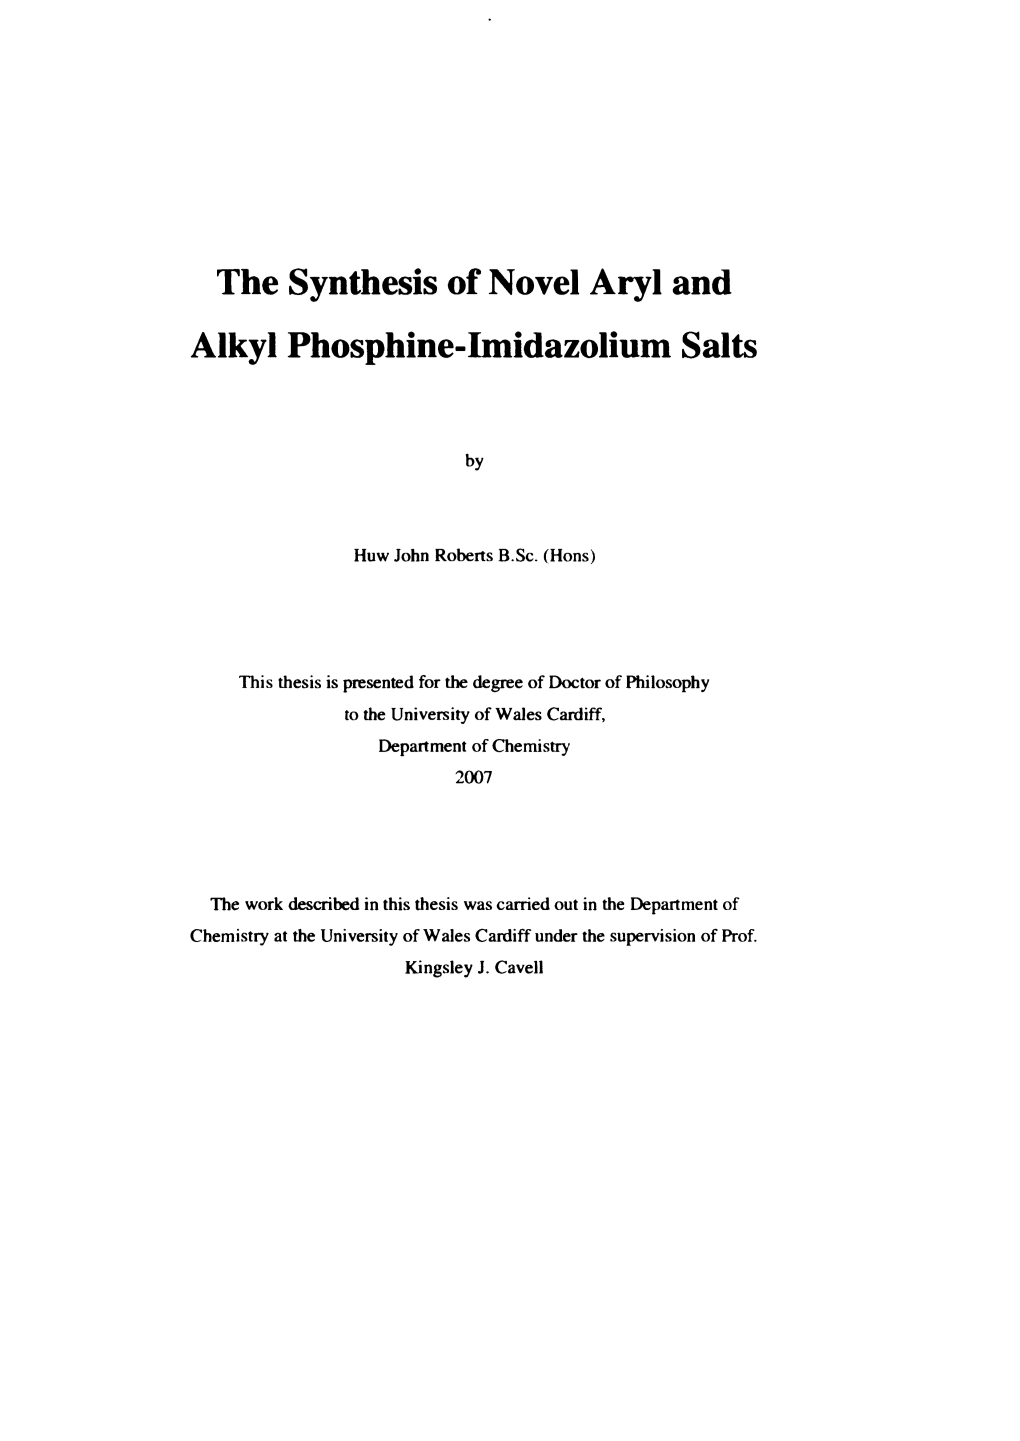 The Synthesis of Novel Aryl and Alkyl Phosphine-Imidazolium Salts